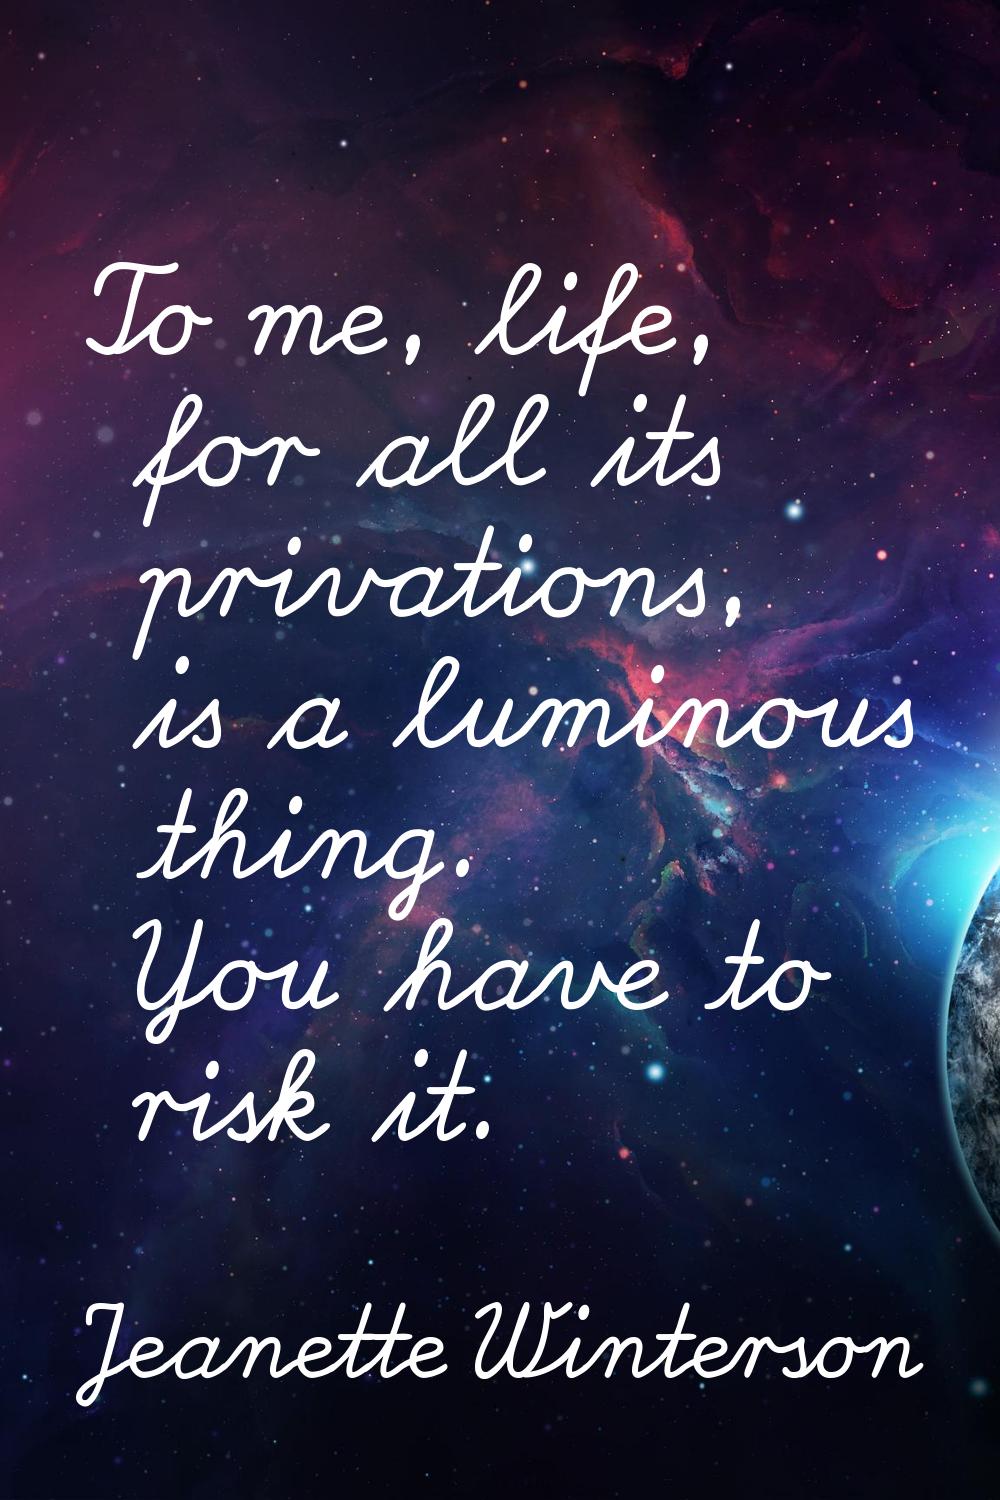 To me, life, for all its privations, is a luminous thing. You have to risk it.